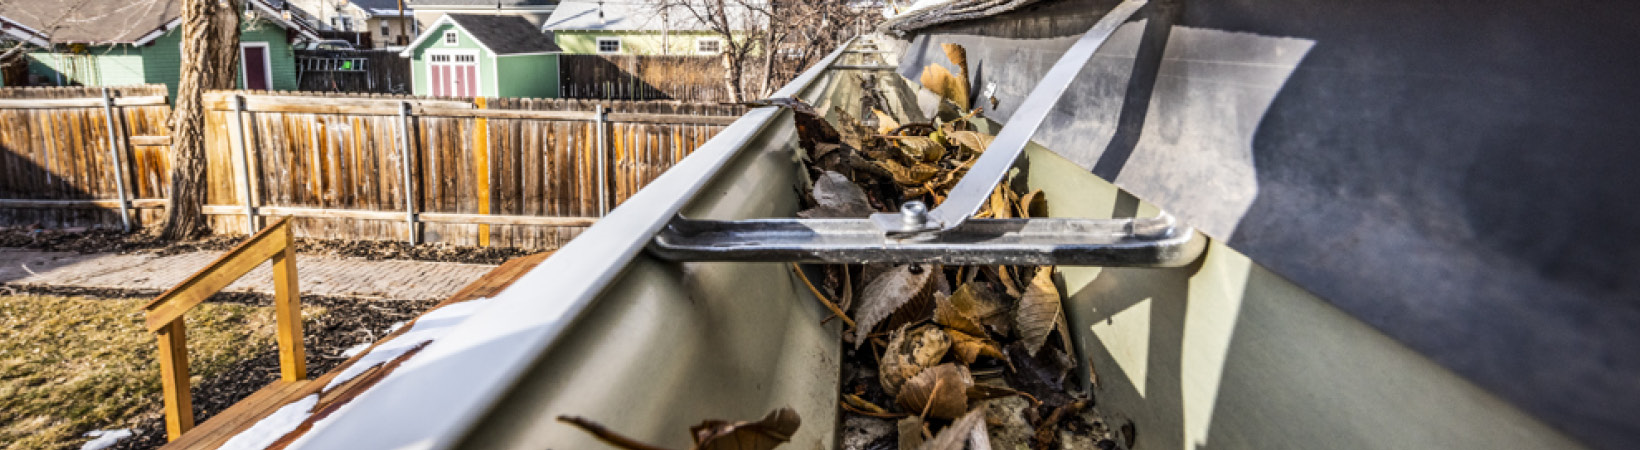 Gutter cleaning is one of the most dangerous household tasks. Here’s how to stay safe. 